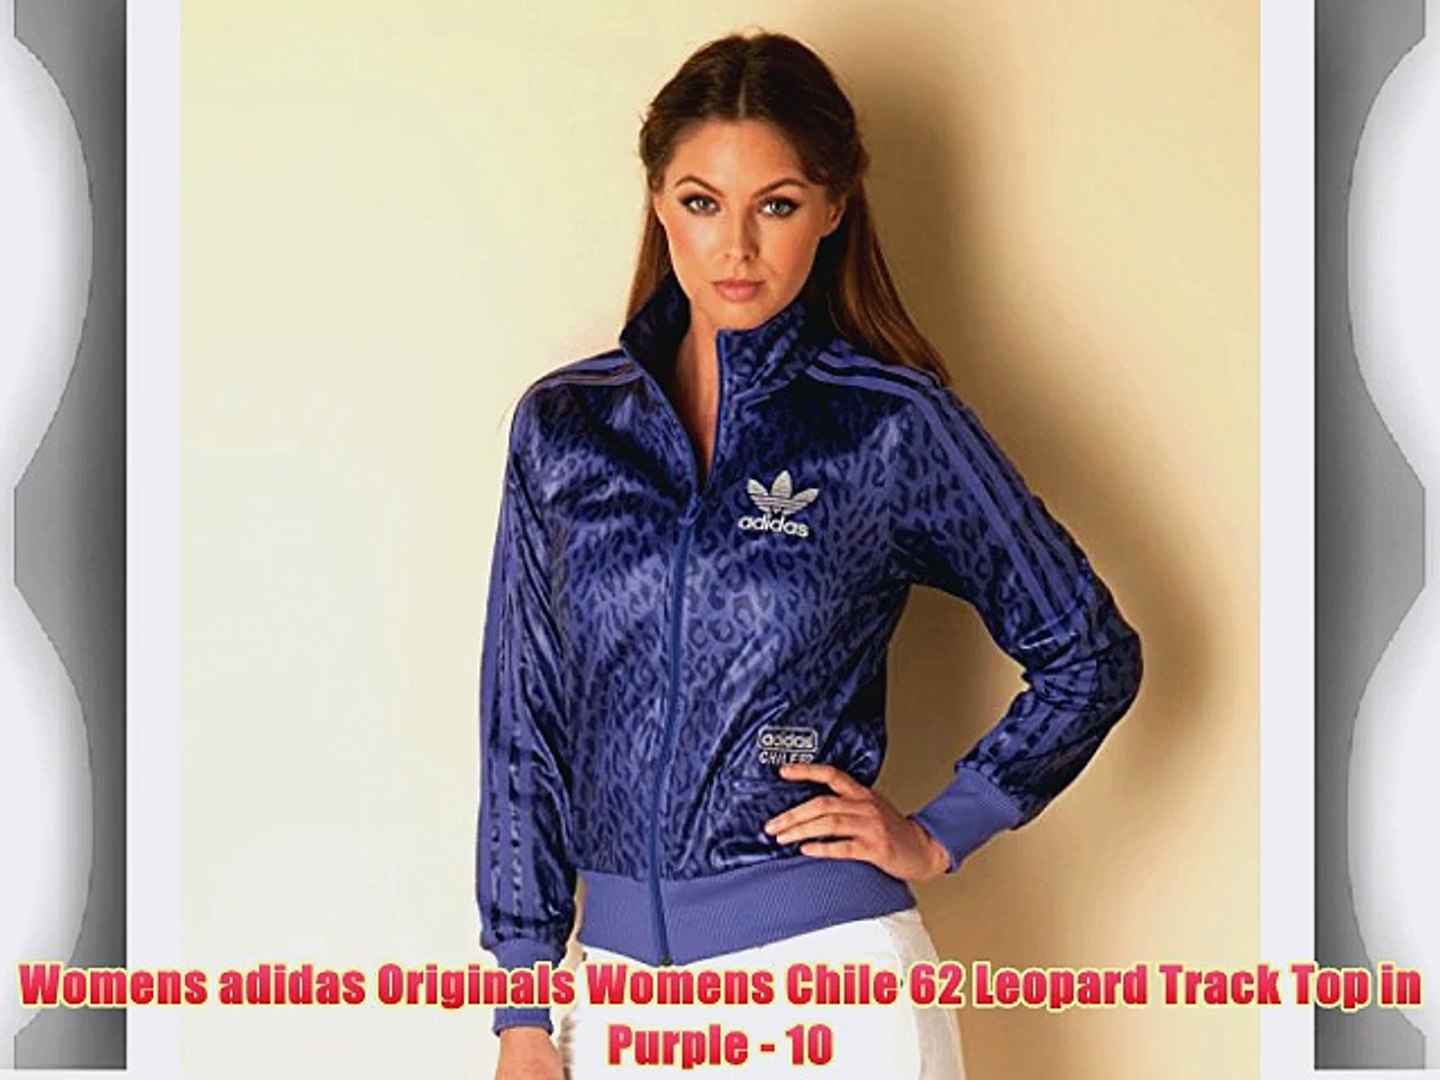 Womens adidas Originals Womens Chile 62 Leopard Track Top in Purple - 10 -  video Dailymotion